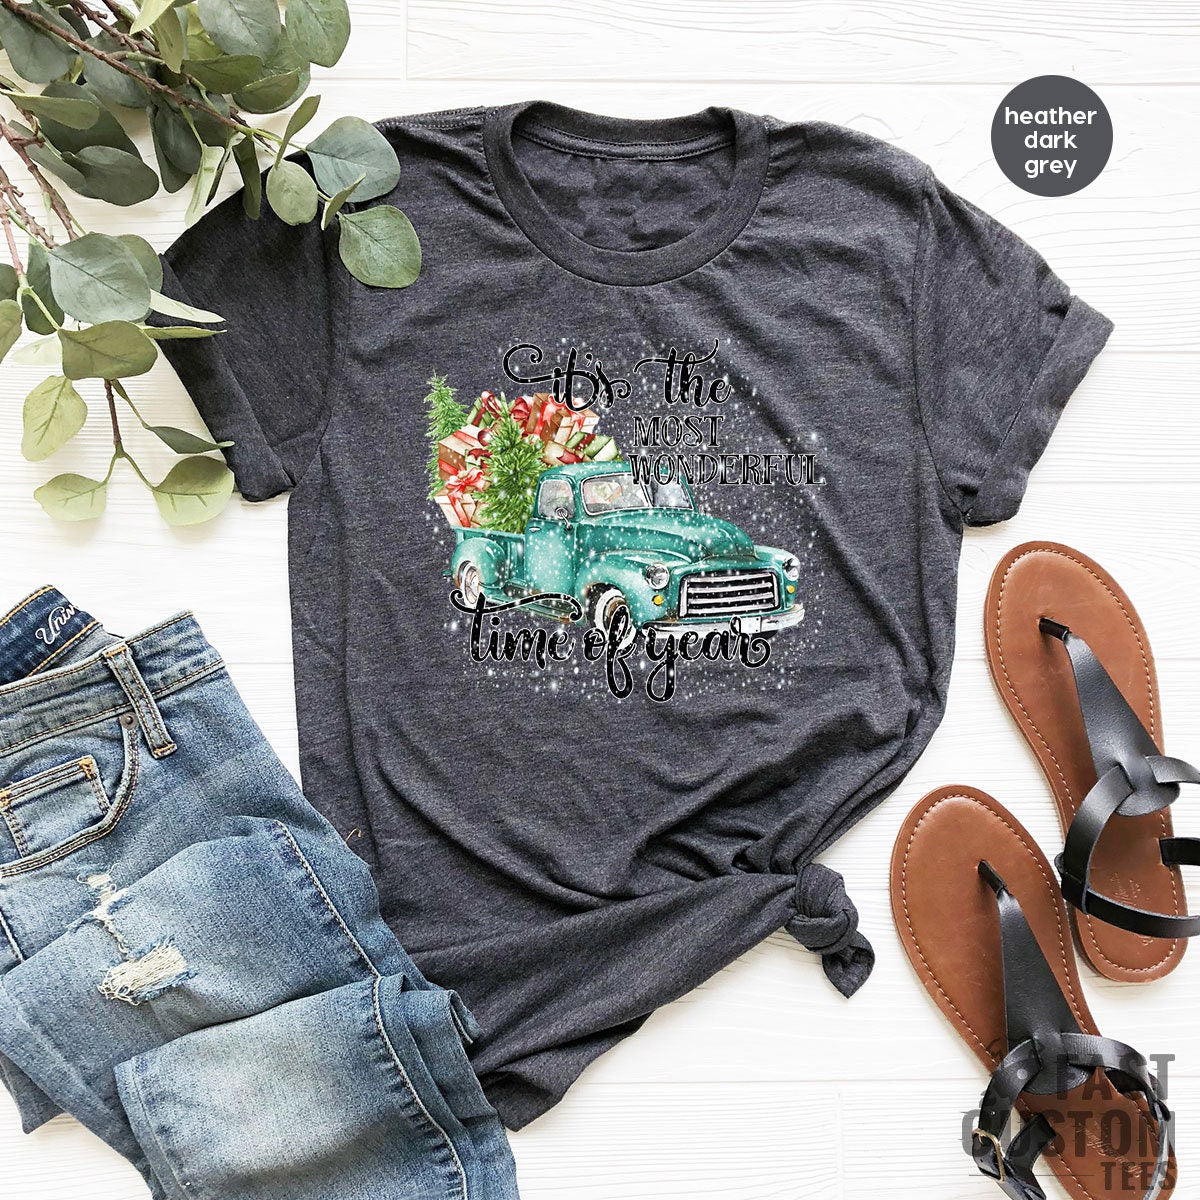 It's The Most Wonderful Time Of The Year Shirt, Christmas Tree Shirt, Christmas Truck shirt, Family Christmas Shirts, Gift For Christmas Tee - Fastdeliverytees.com